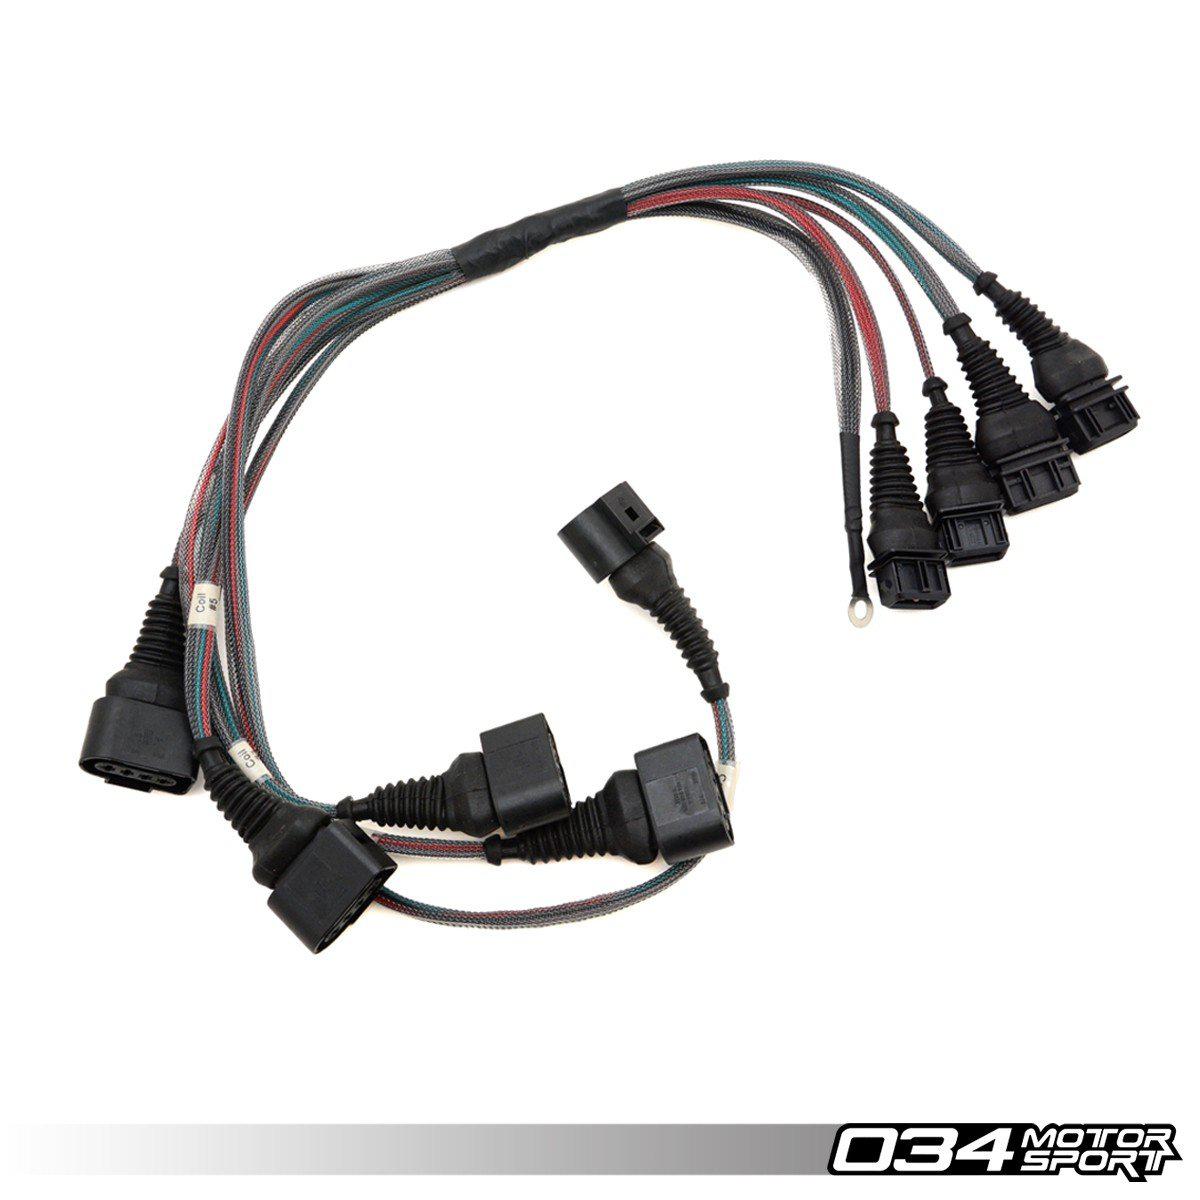 034Motorsport C4 Audi URS4/URS6 &amp; S2/Rs2 I5 20vt Aan/Aby/Adu Coil Pack Update Harness For 2.0TFSI Coils-A Little Tuning Co